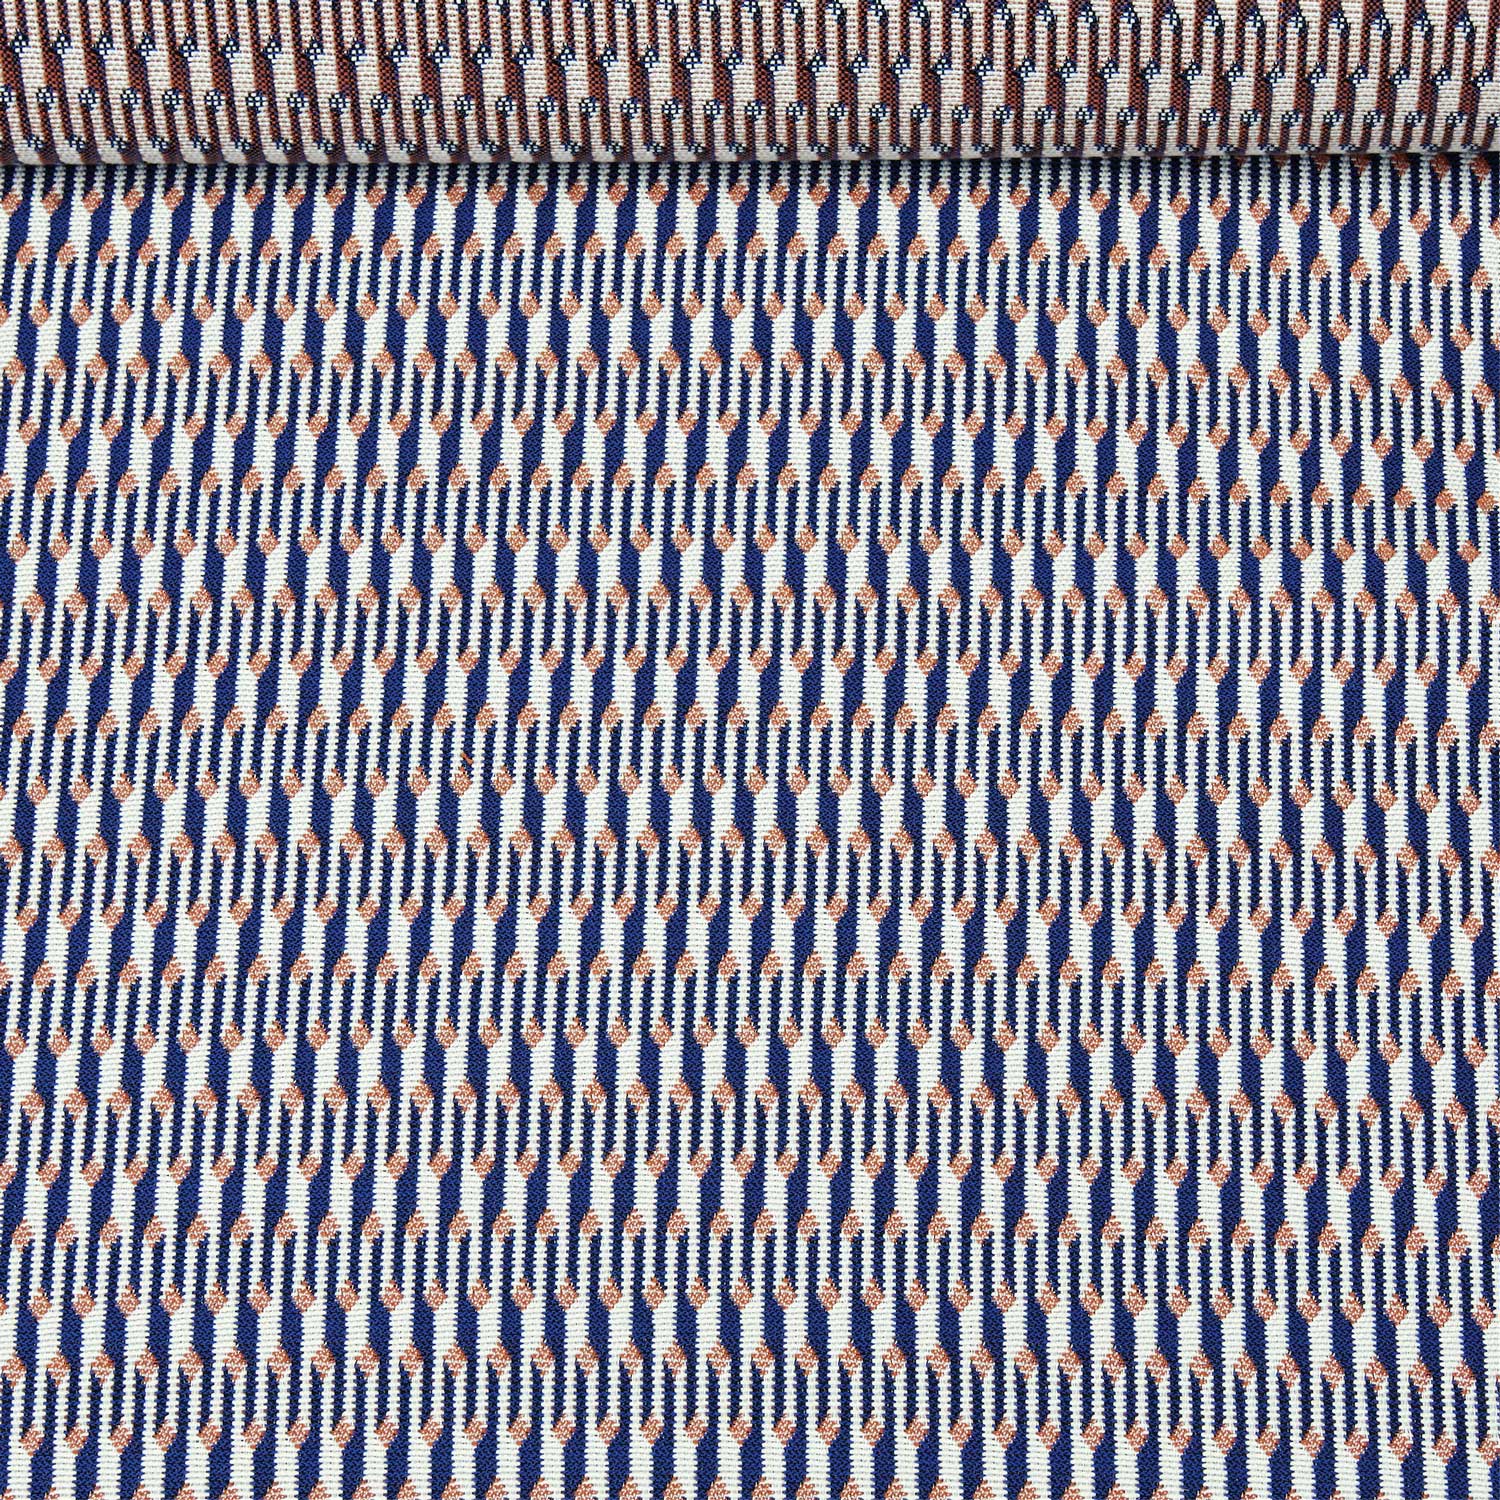 A birds eye view of a jacquard woven white, blue and orange outdoor performance fabric roll. 